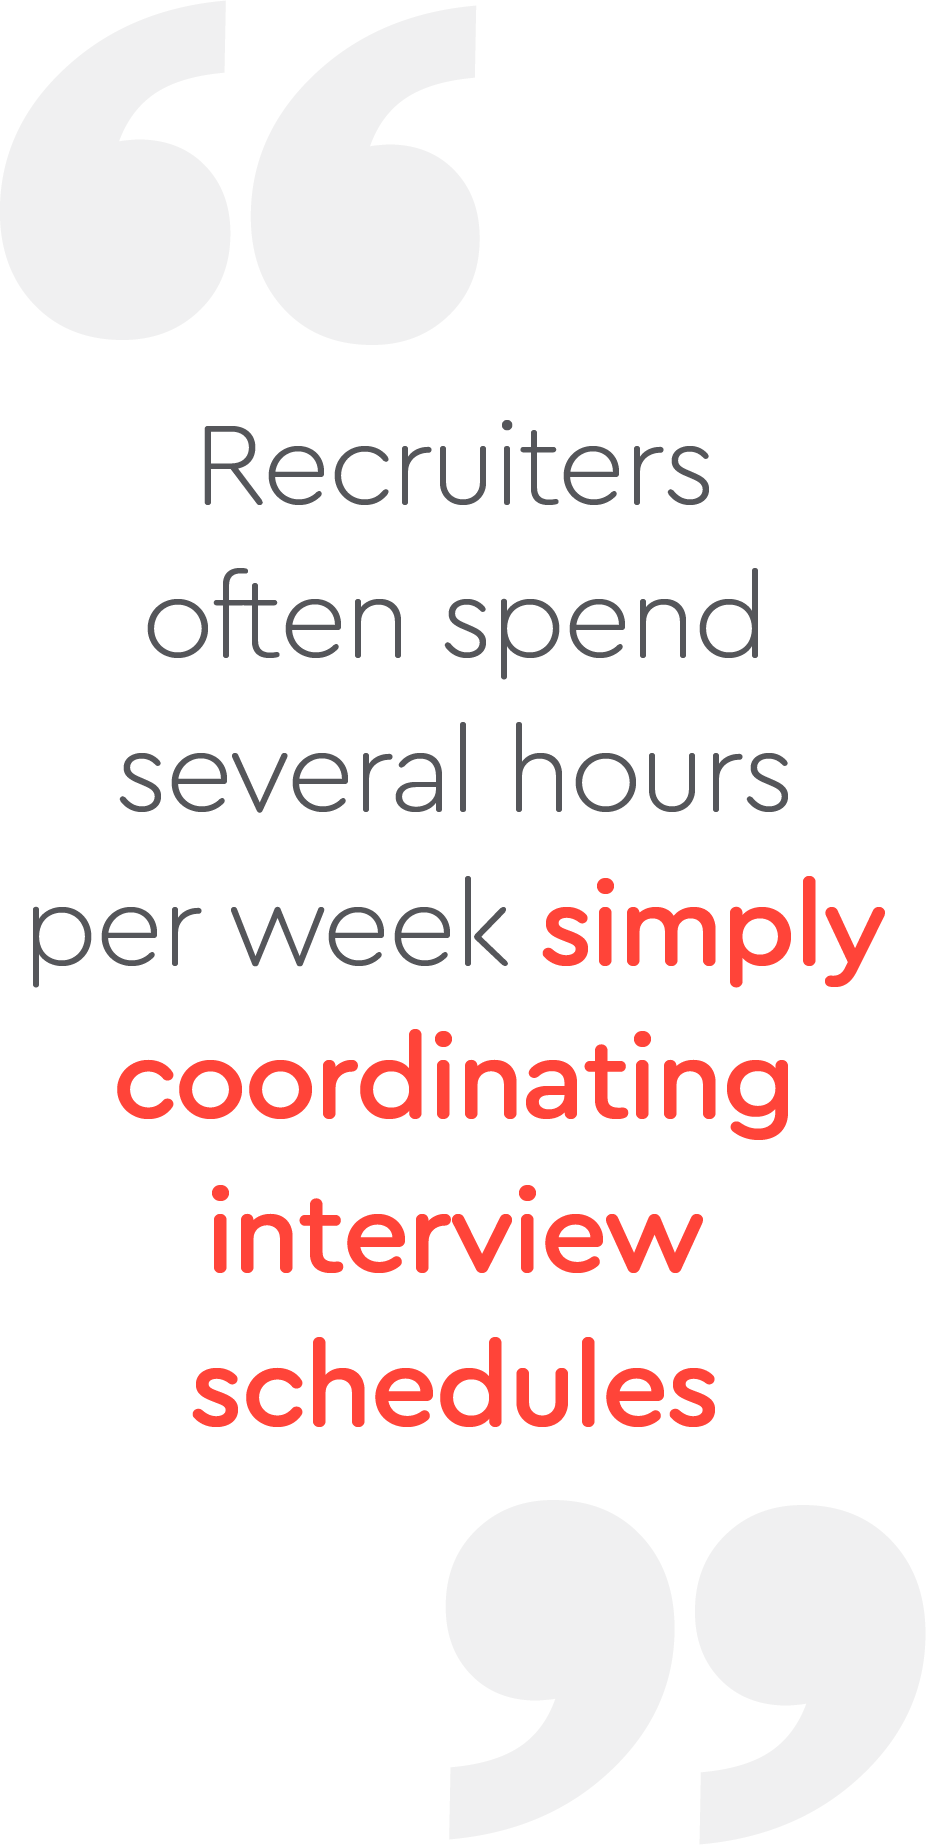 Recruiters often spend several hours per week simply coordinating interview scheduler pull quote